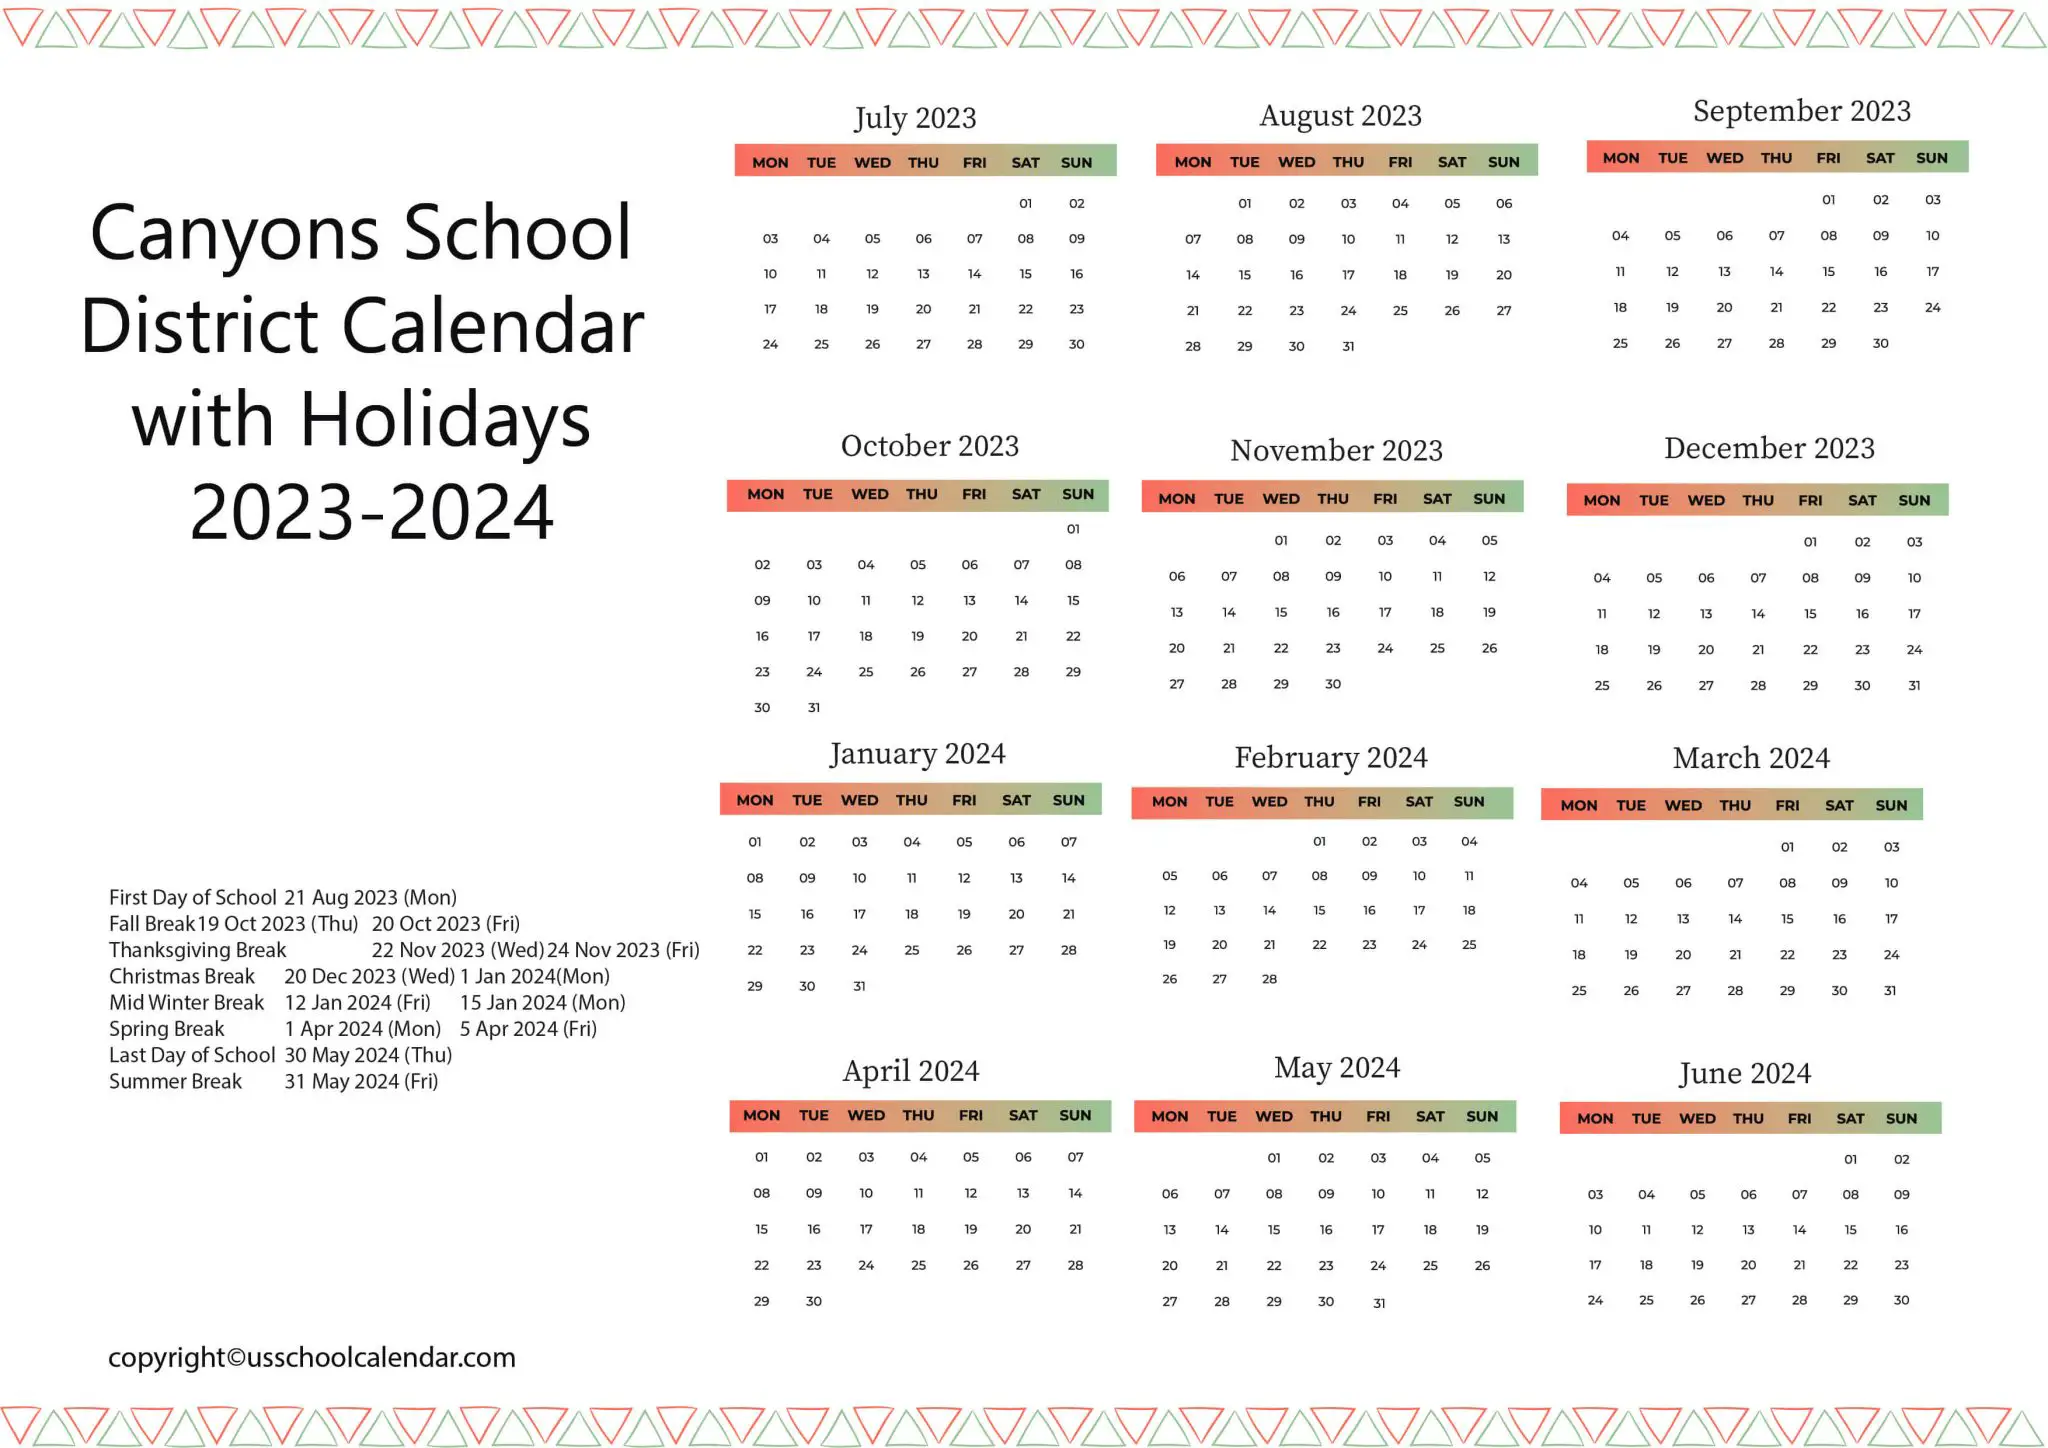 canyons-school-district-calendar-with-holidays-2023-2024